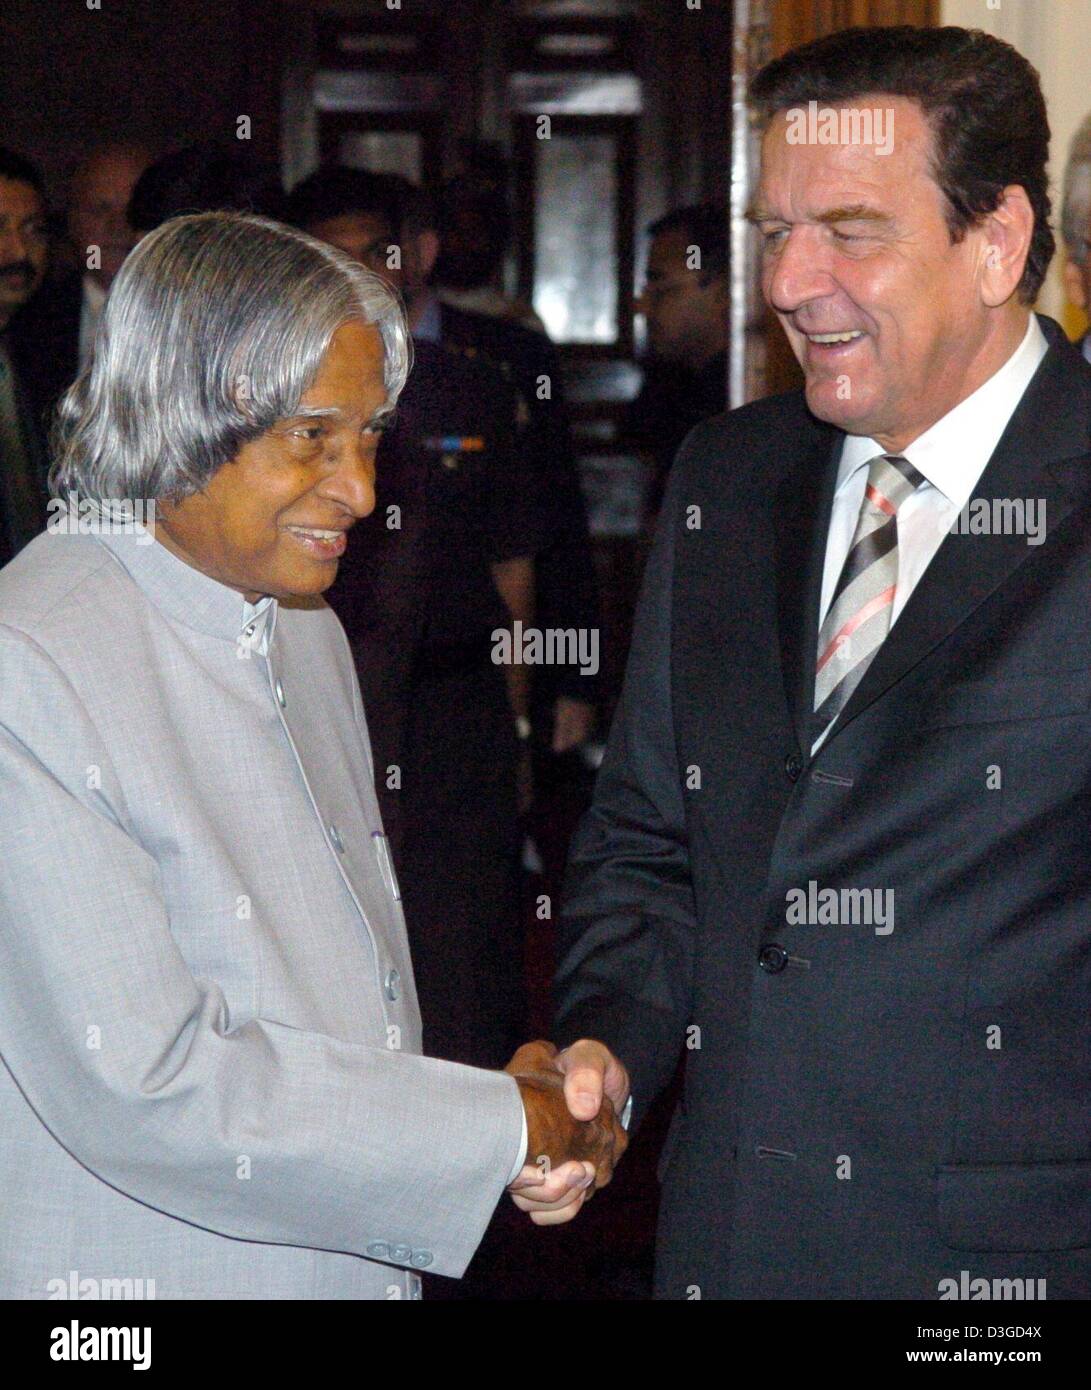 (dpa) - Indian President Abdul Kalam shakes hands with German Chancellor Gerhard Schroeder (R) in New Delhi, 7 October 2004. Schroeder is on a two-day visit to India. Stock Photo